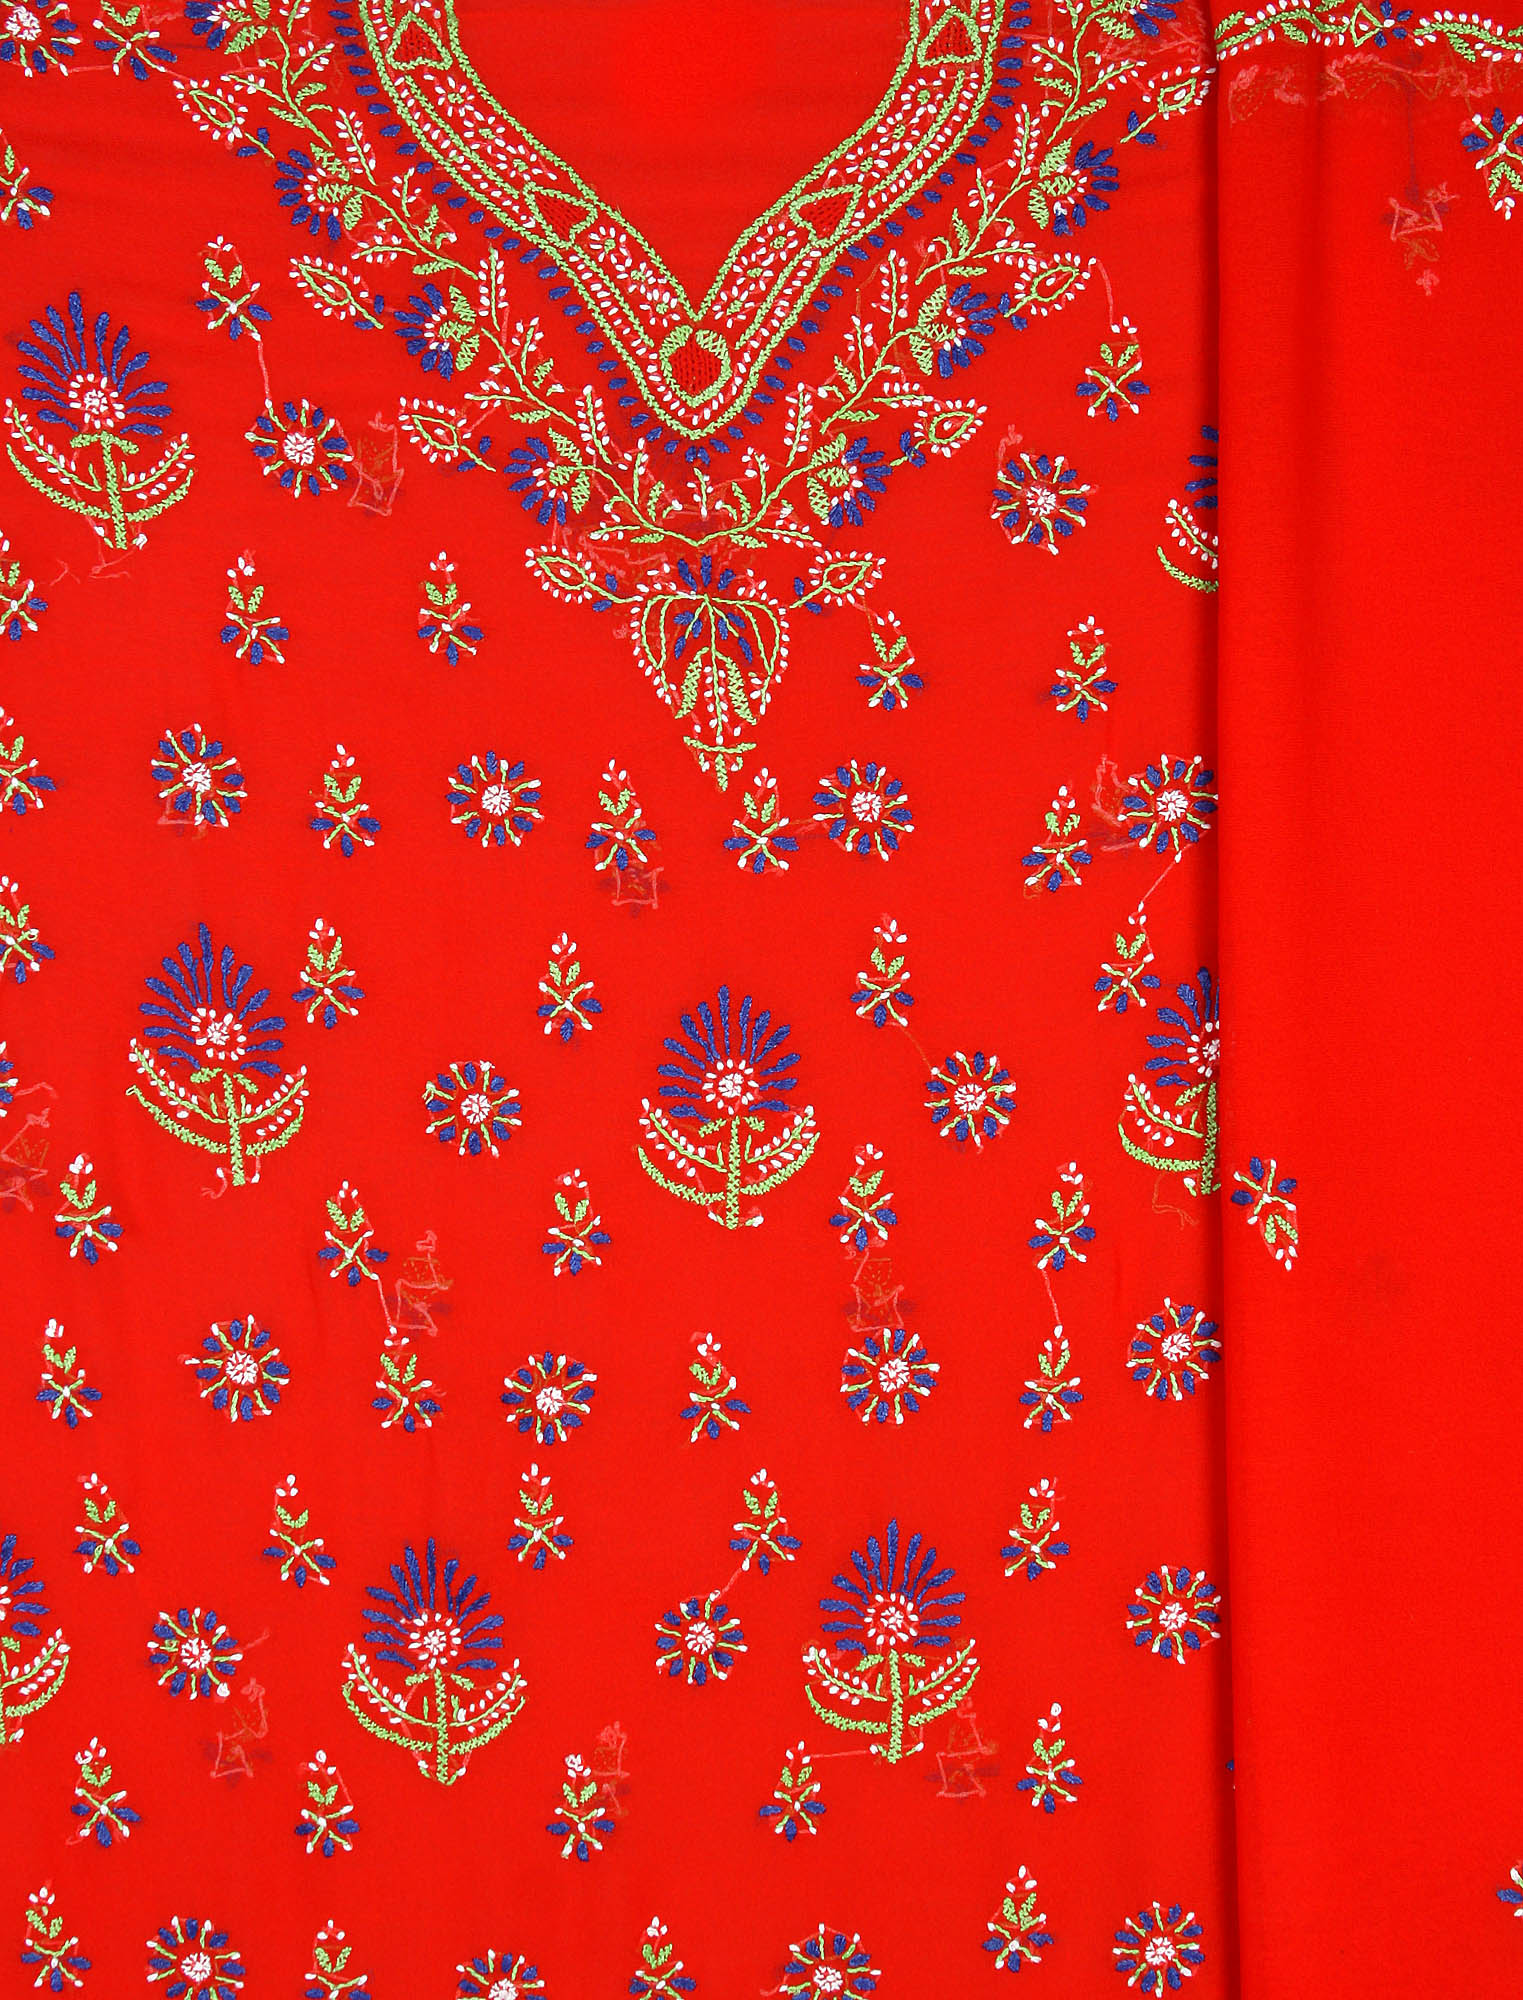 Red Chikan Hand-Embroidered Salwar Kameez Fabric from Lucknow | Exotic ...